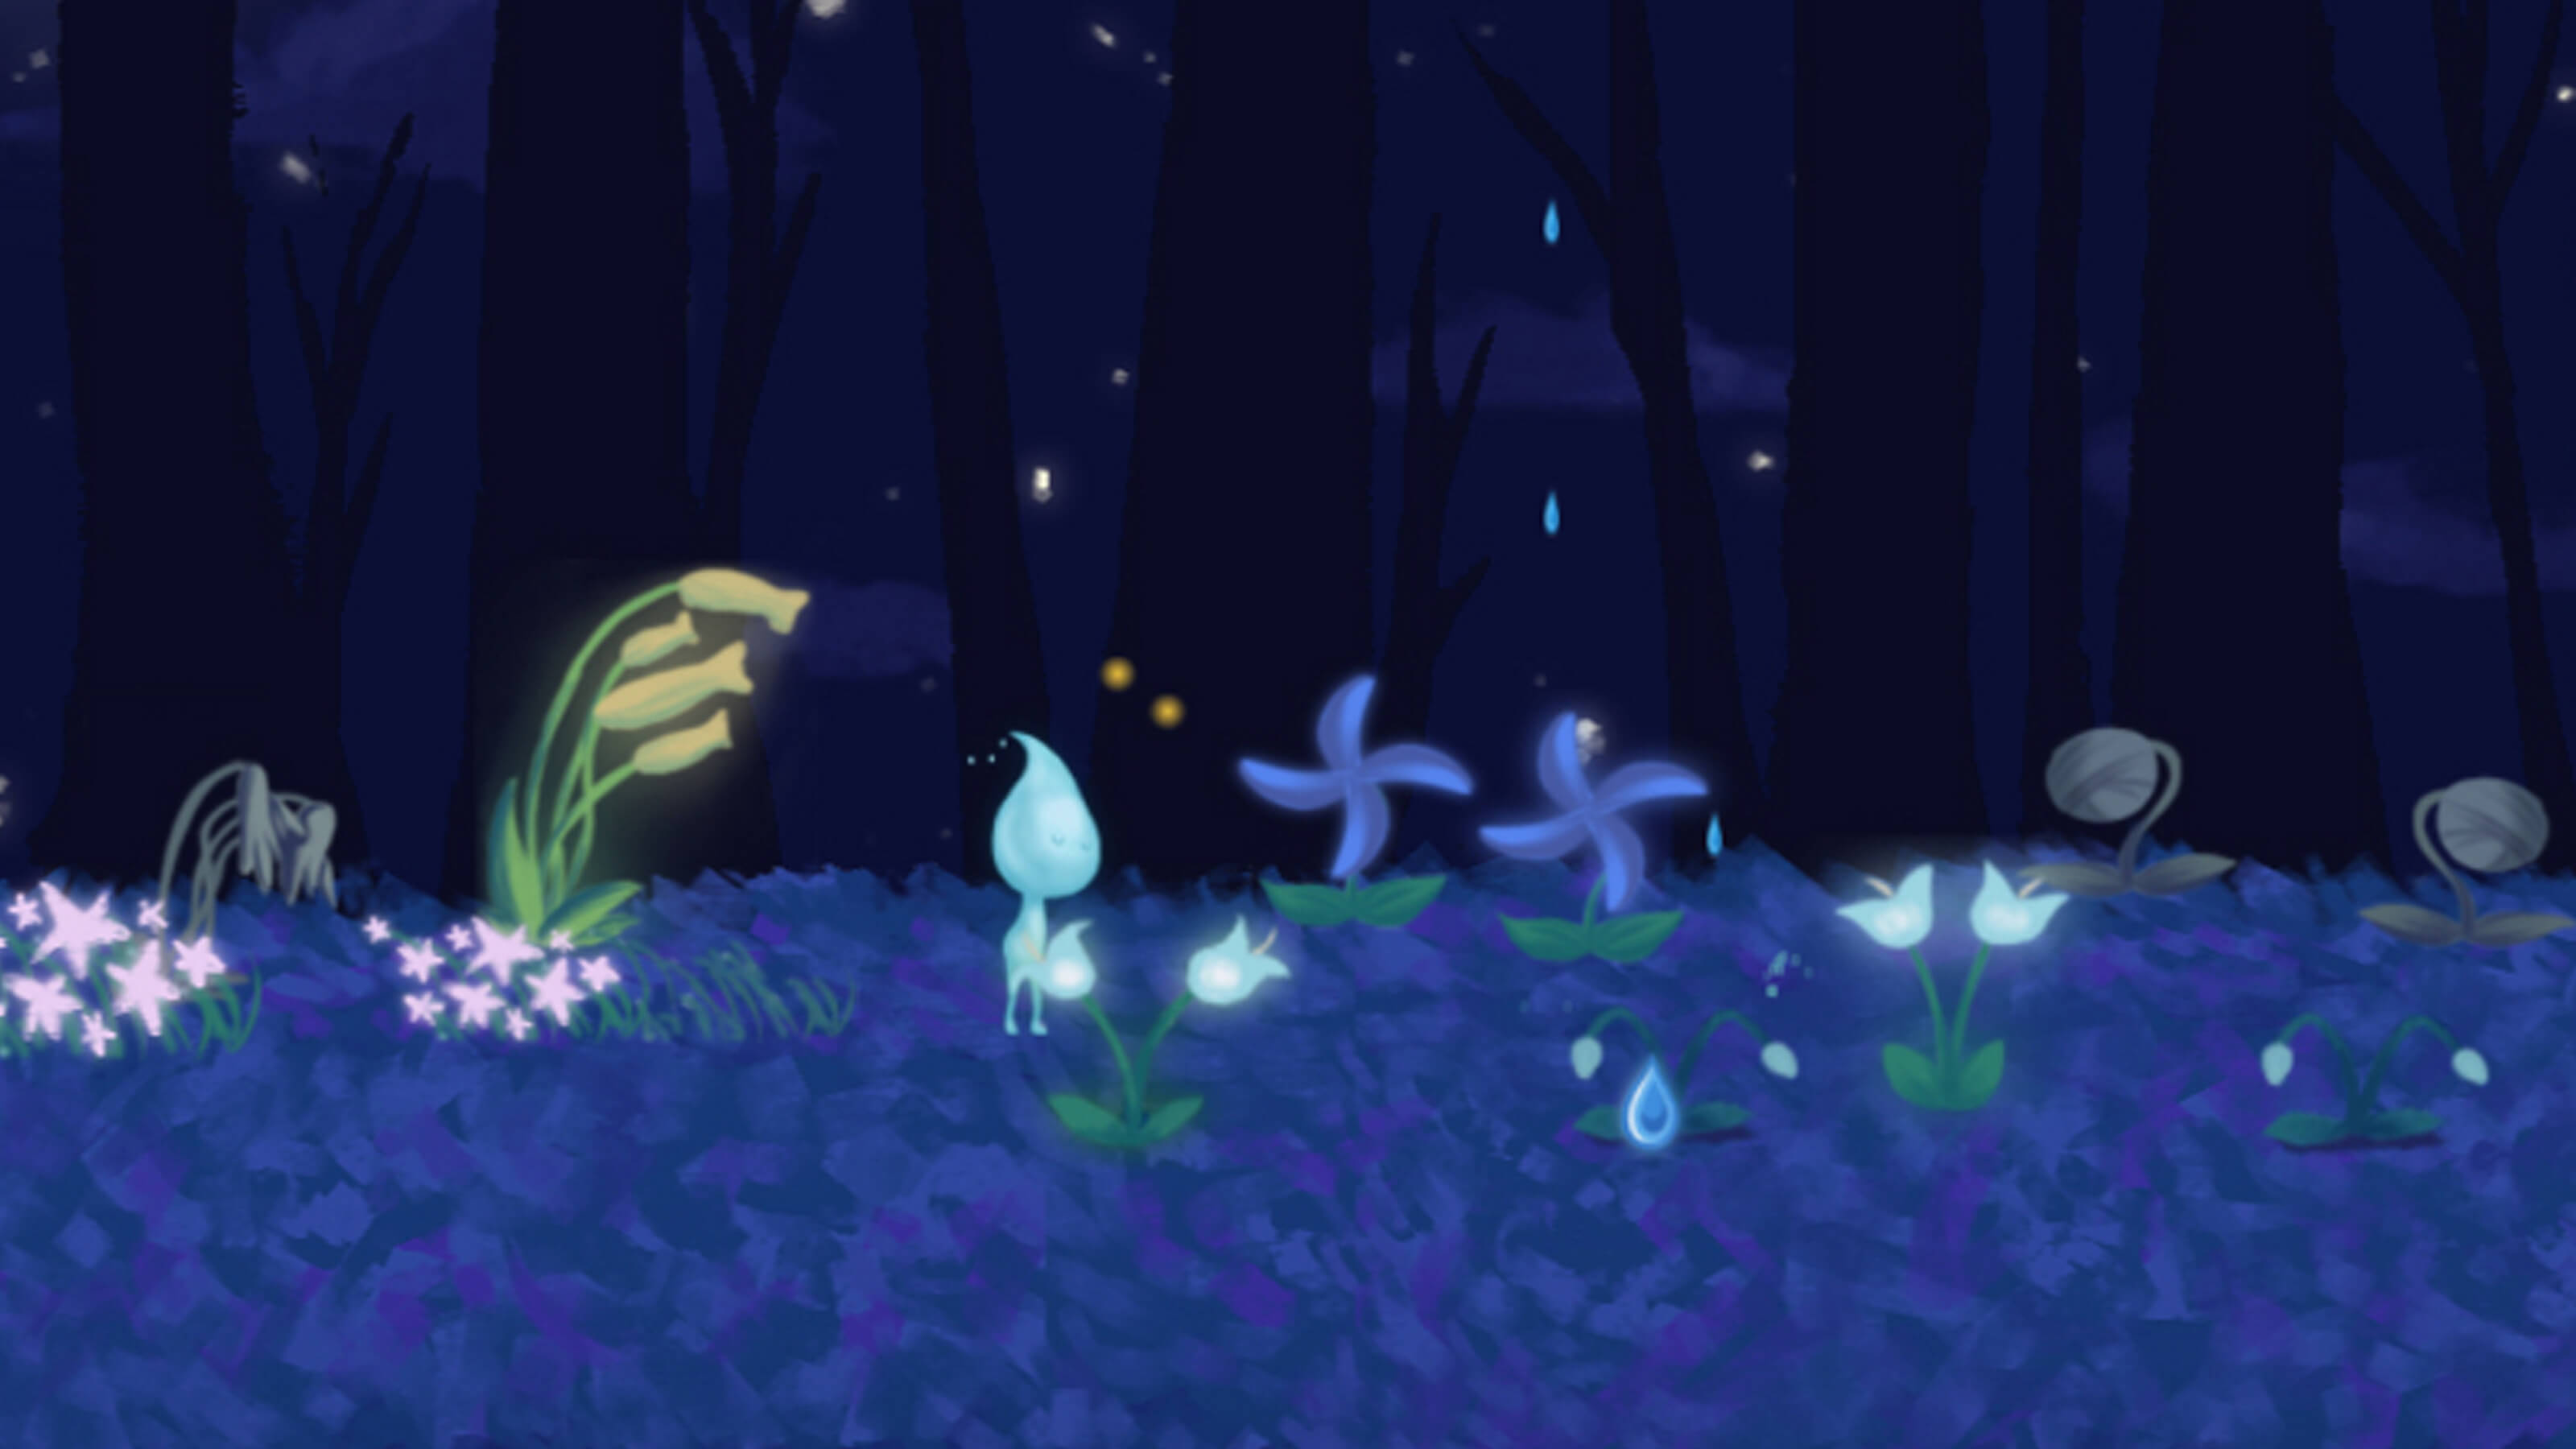 Douse, the raindrop main character of the game, walks among the flowers.